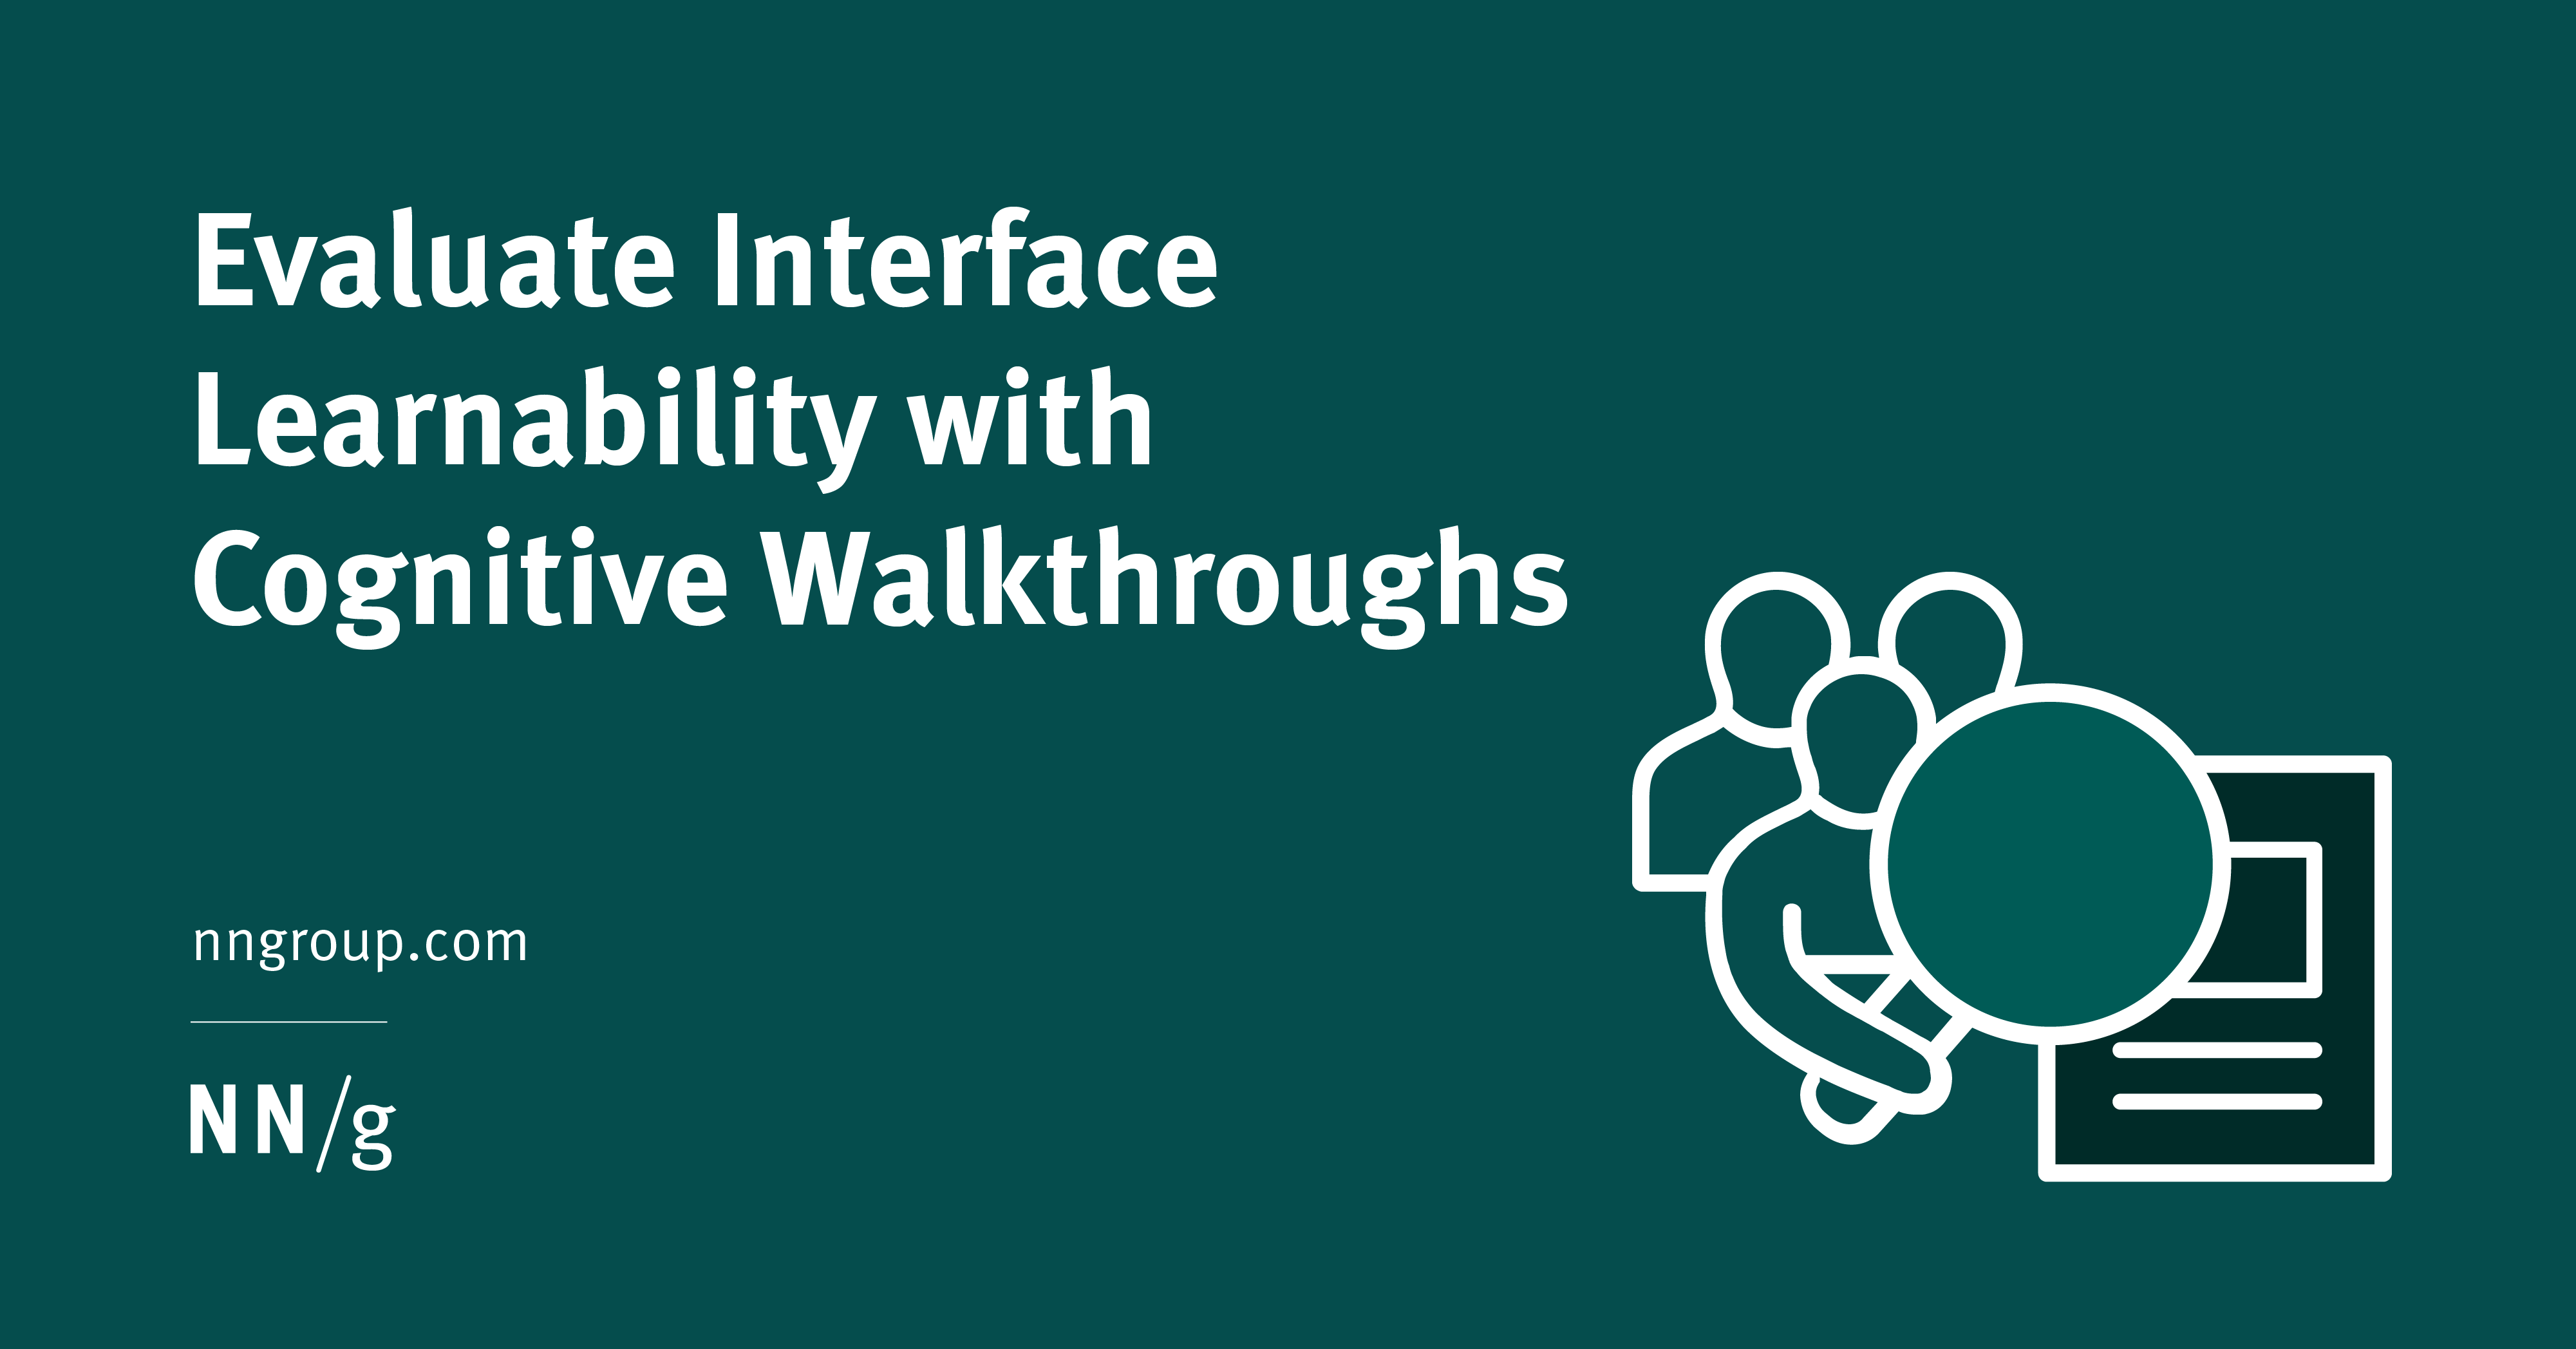 Evaluate Interface Learnability with Cognitive Walkthroughs